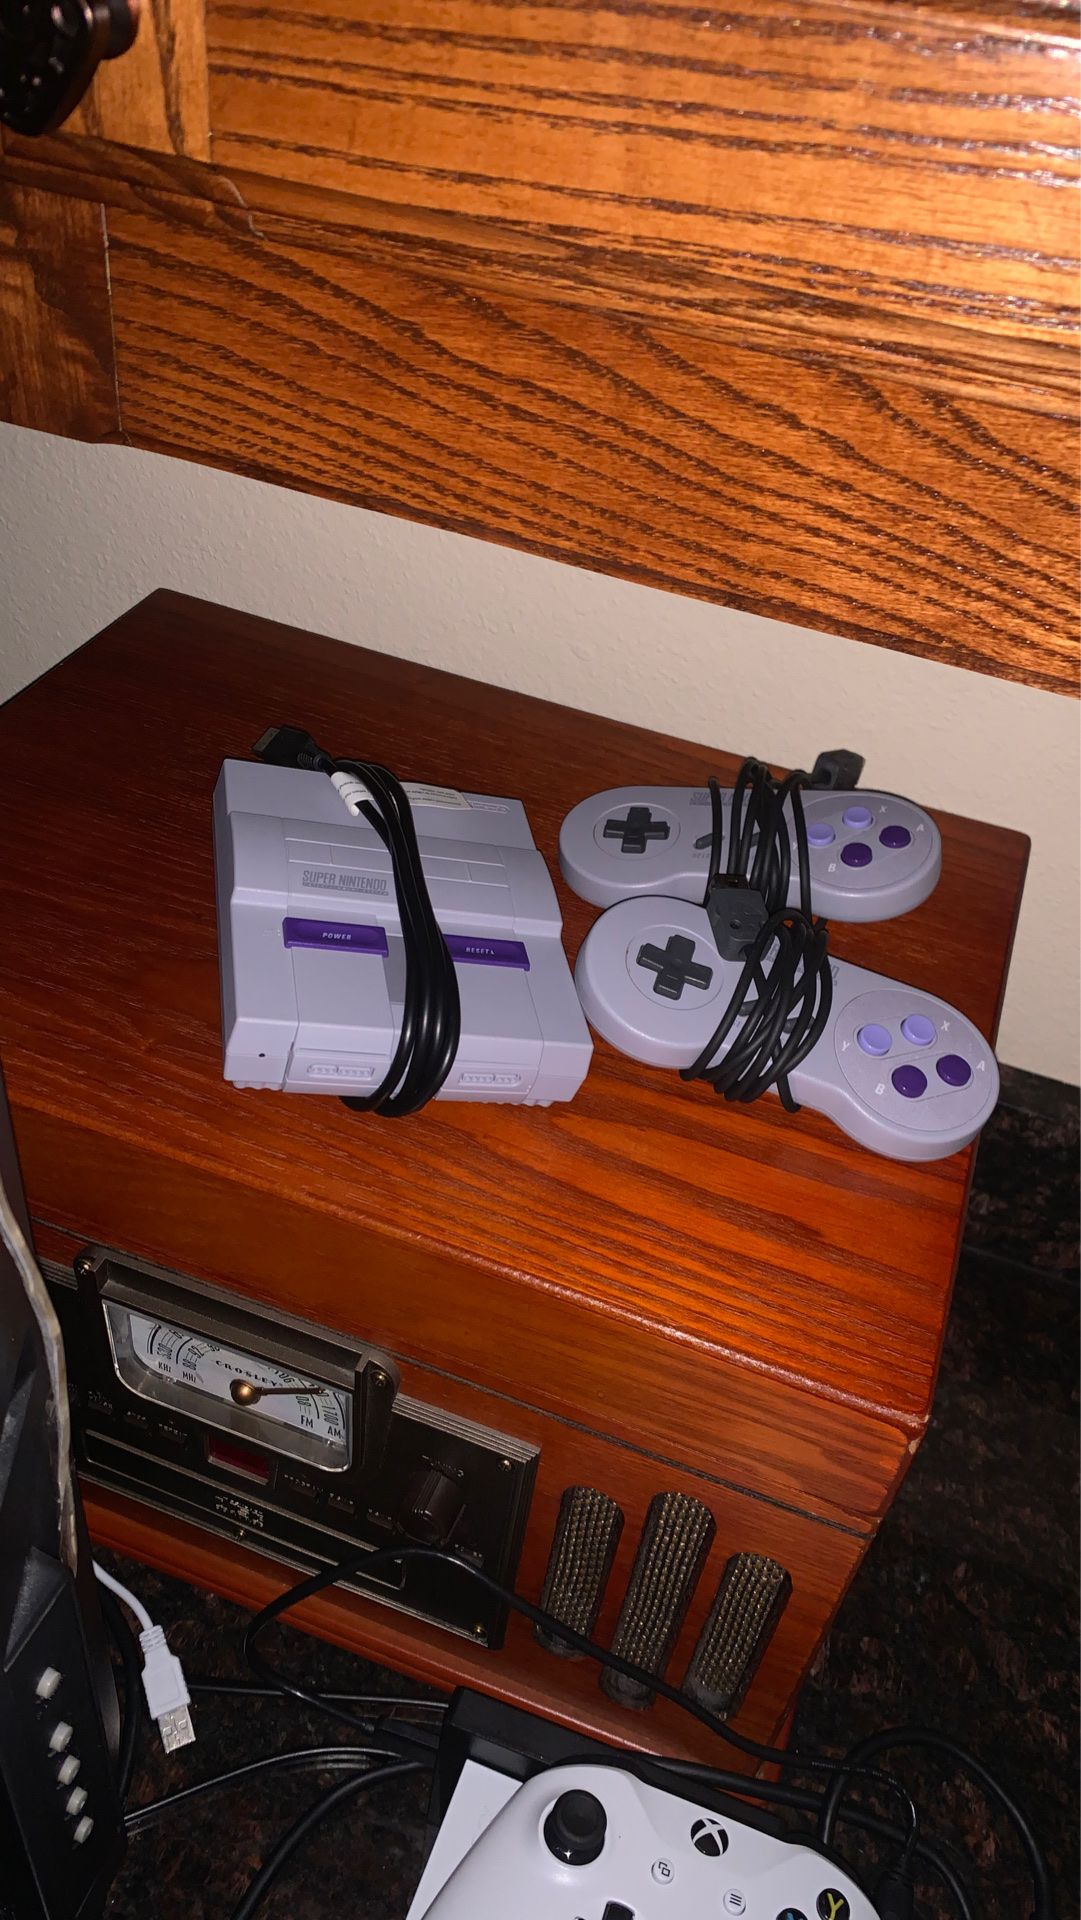 Super Nintendo with over 20 games preinstalled